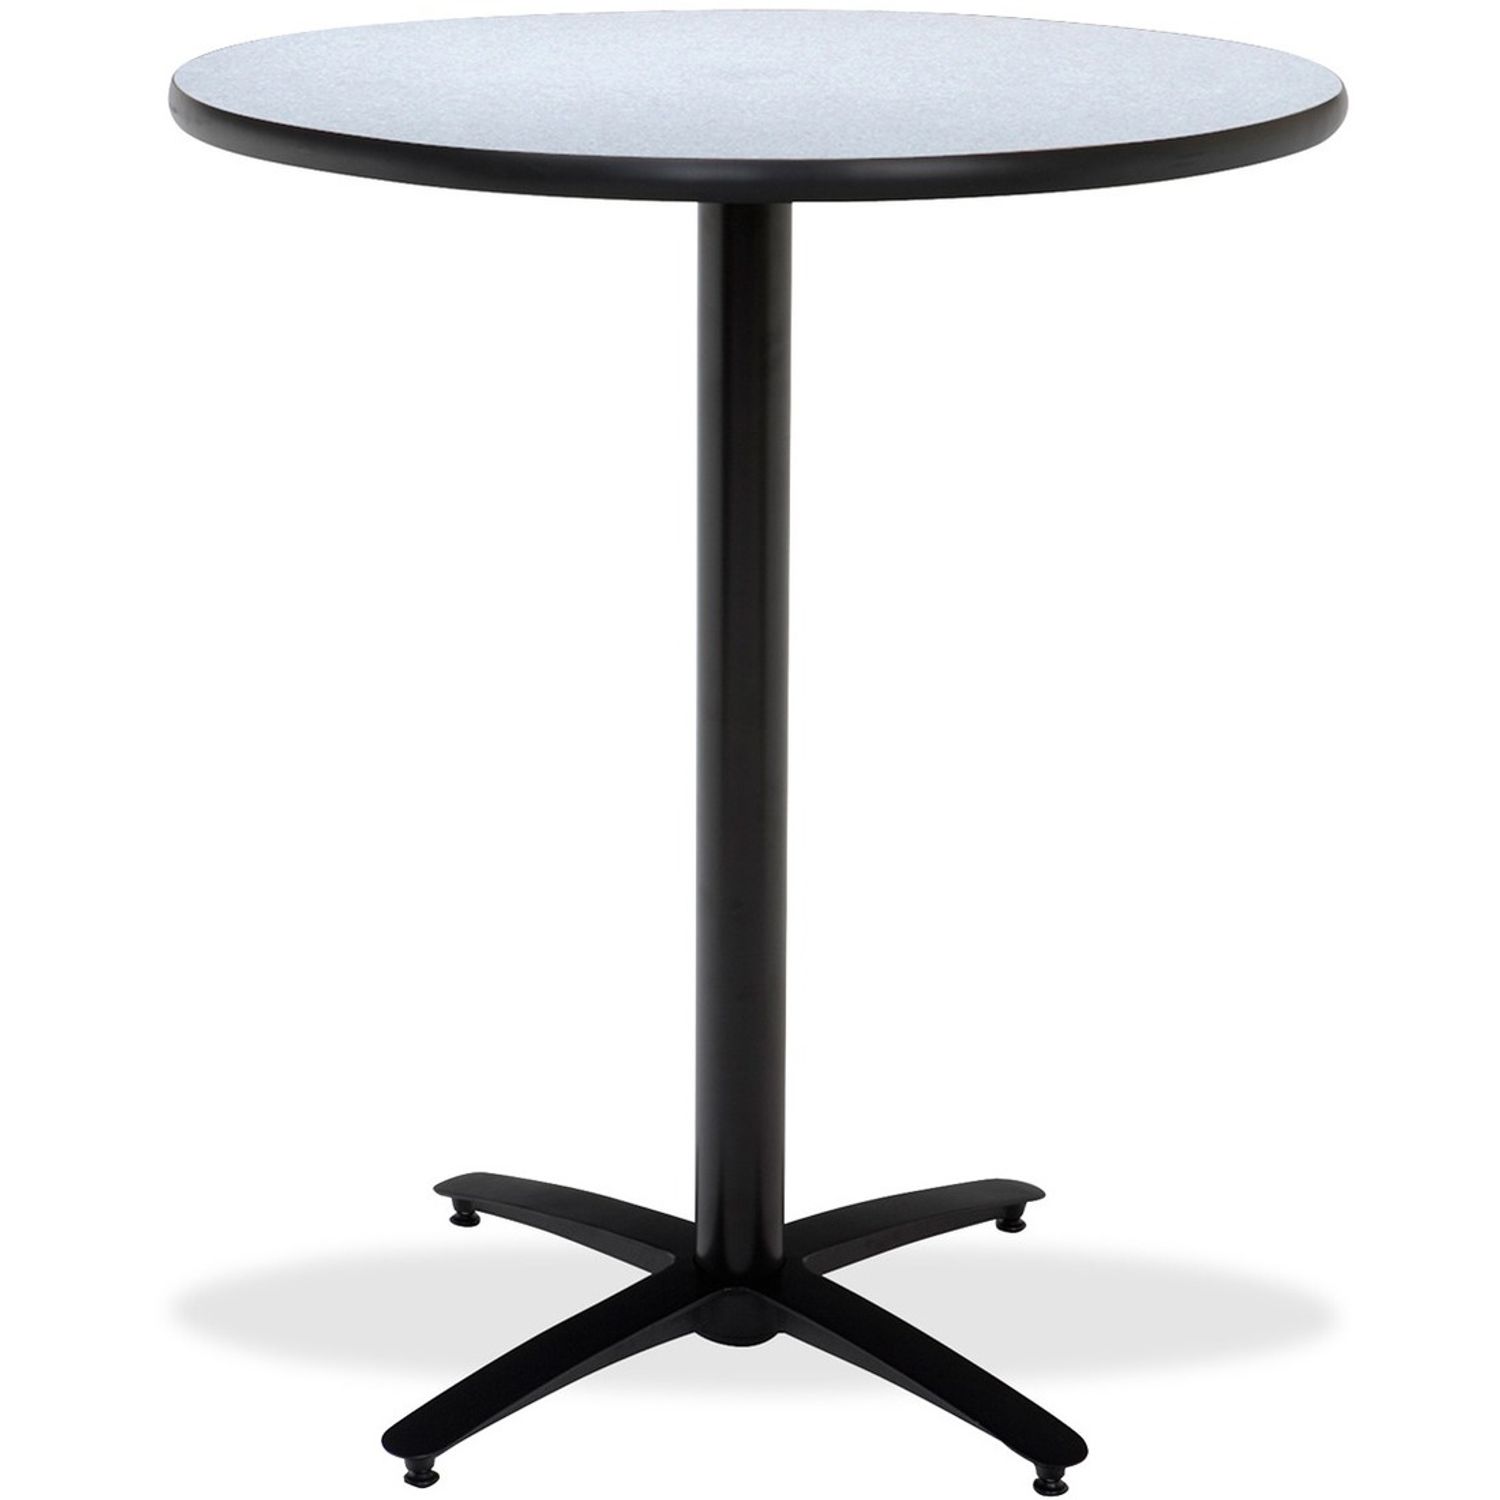 T42RD-B2125-38 Bar Height Pedestal Table Laminated Round, Nebula Gray Top, Black Arch Base, 1.25" Table Top Thickness x 42" Table Top Diameter, Assembly Required